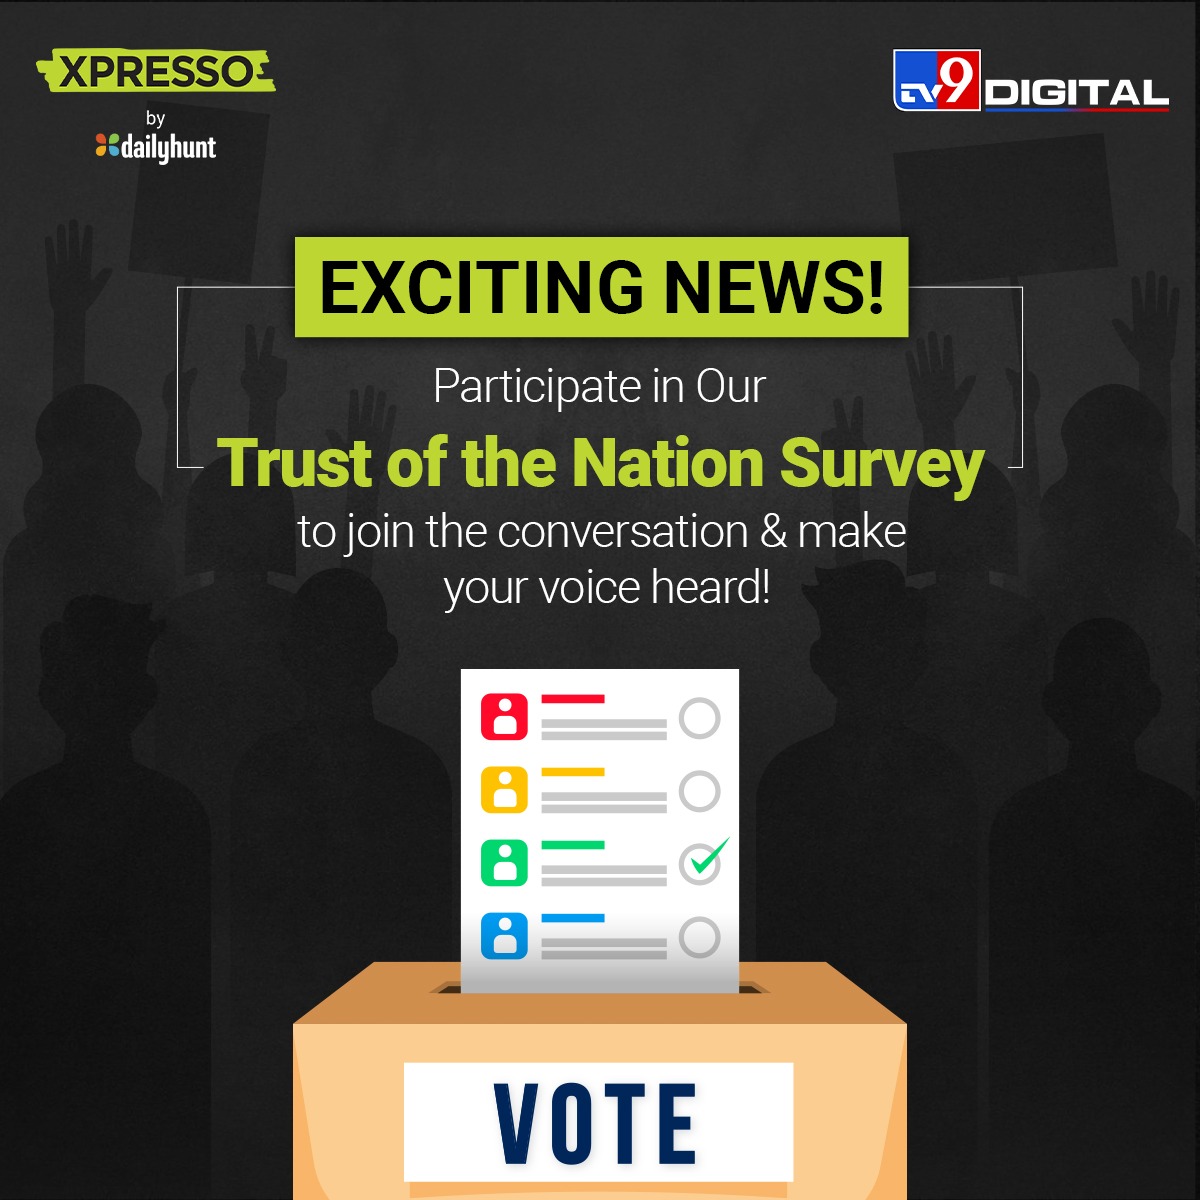 Exciting news! Participate in Our Trust of the Nation Survey to join the conversation & make your voice heard! Click on the link to participate: dhunt.in/TAtiQ #Trustofthenation #elections2024 #dailyhunt #tv9 #prepollsurvey @TV9Bharatvarsh